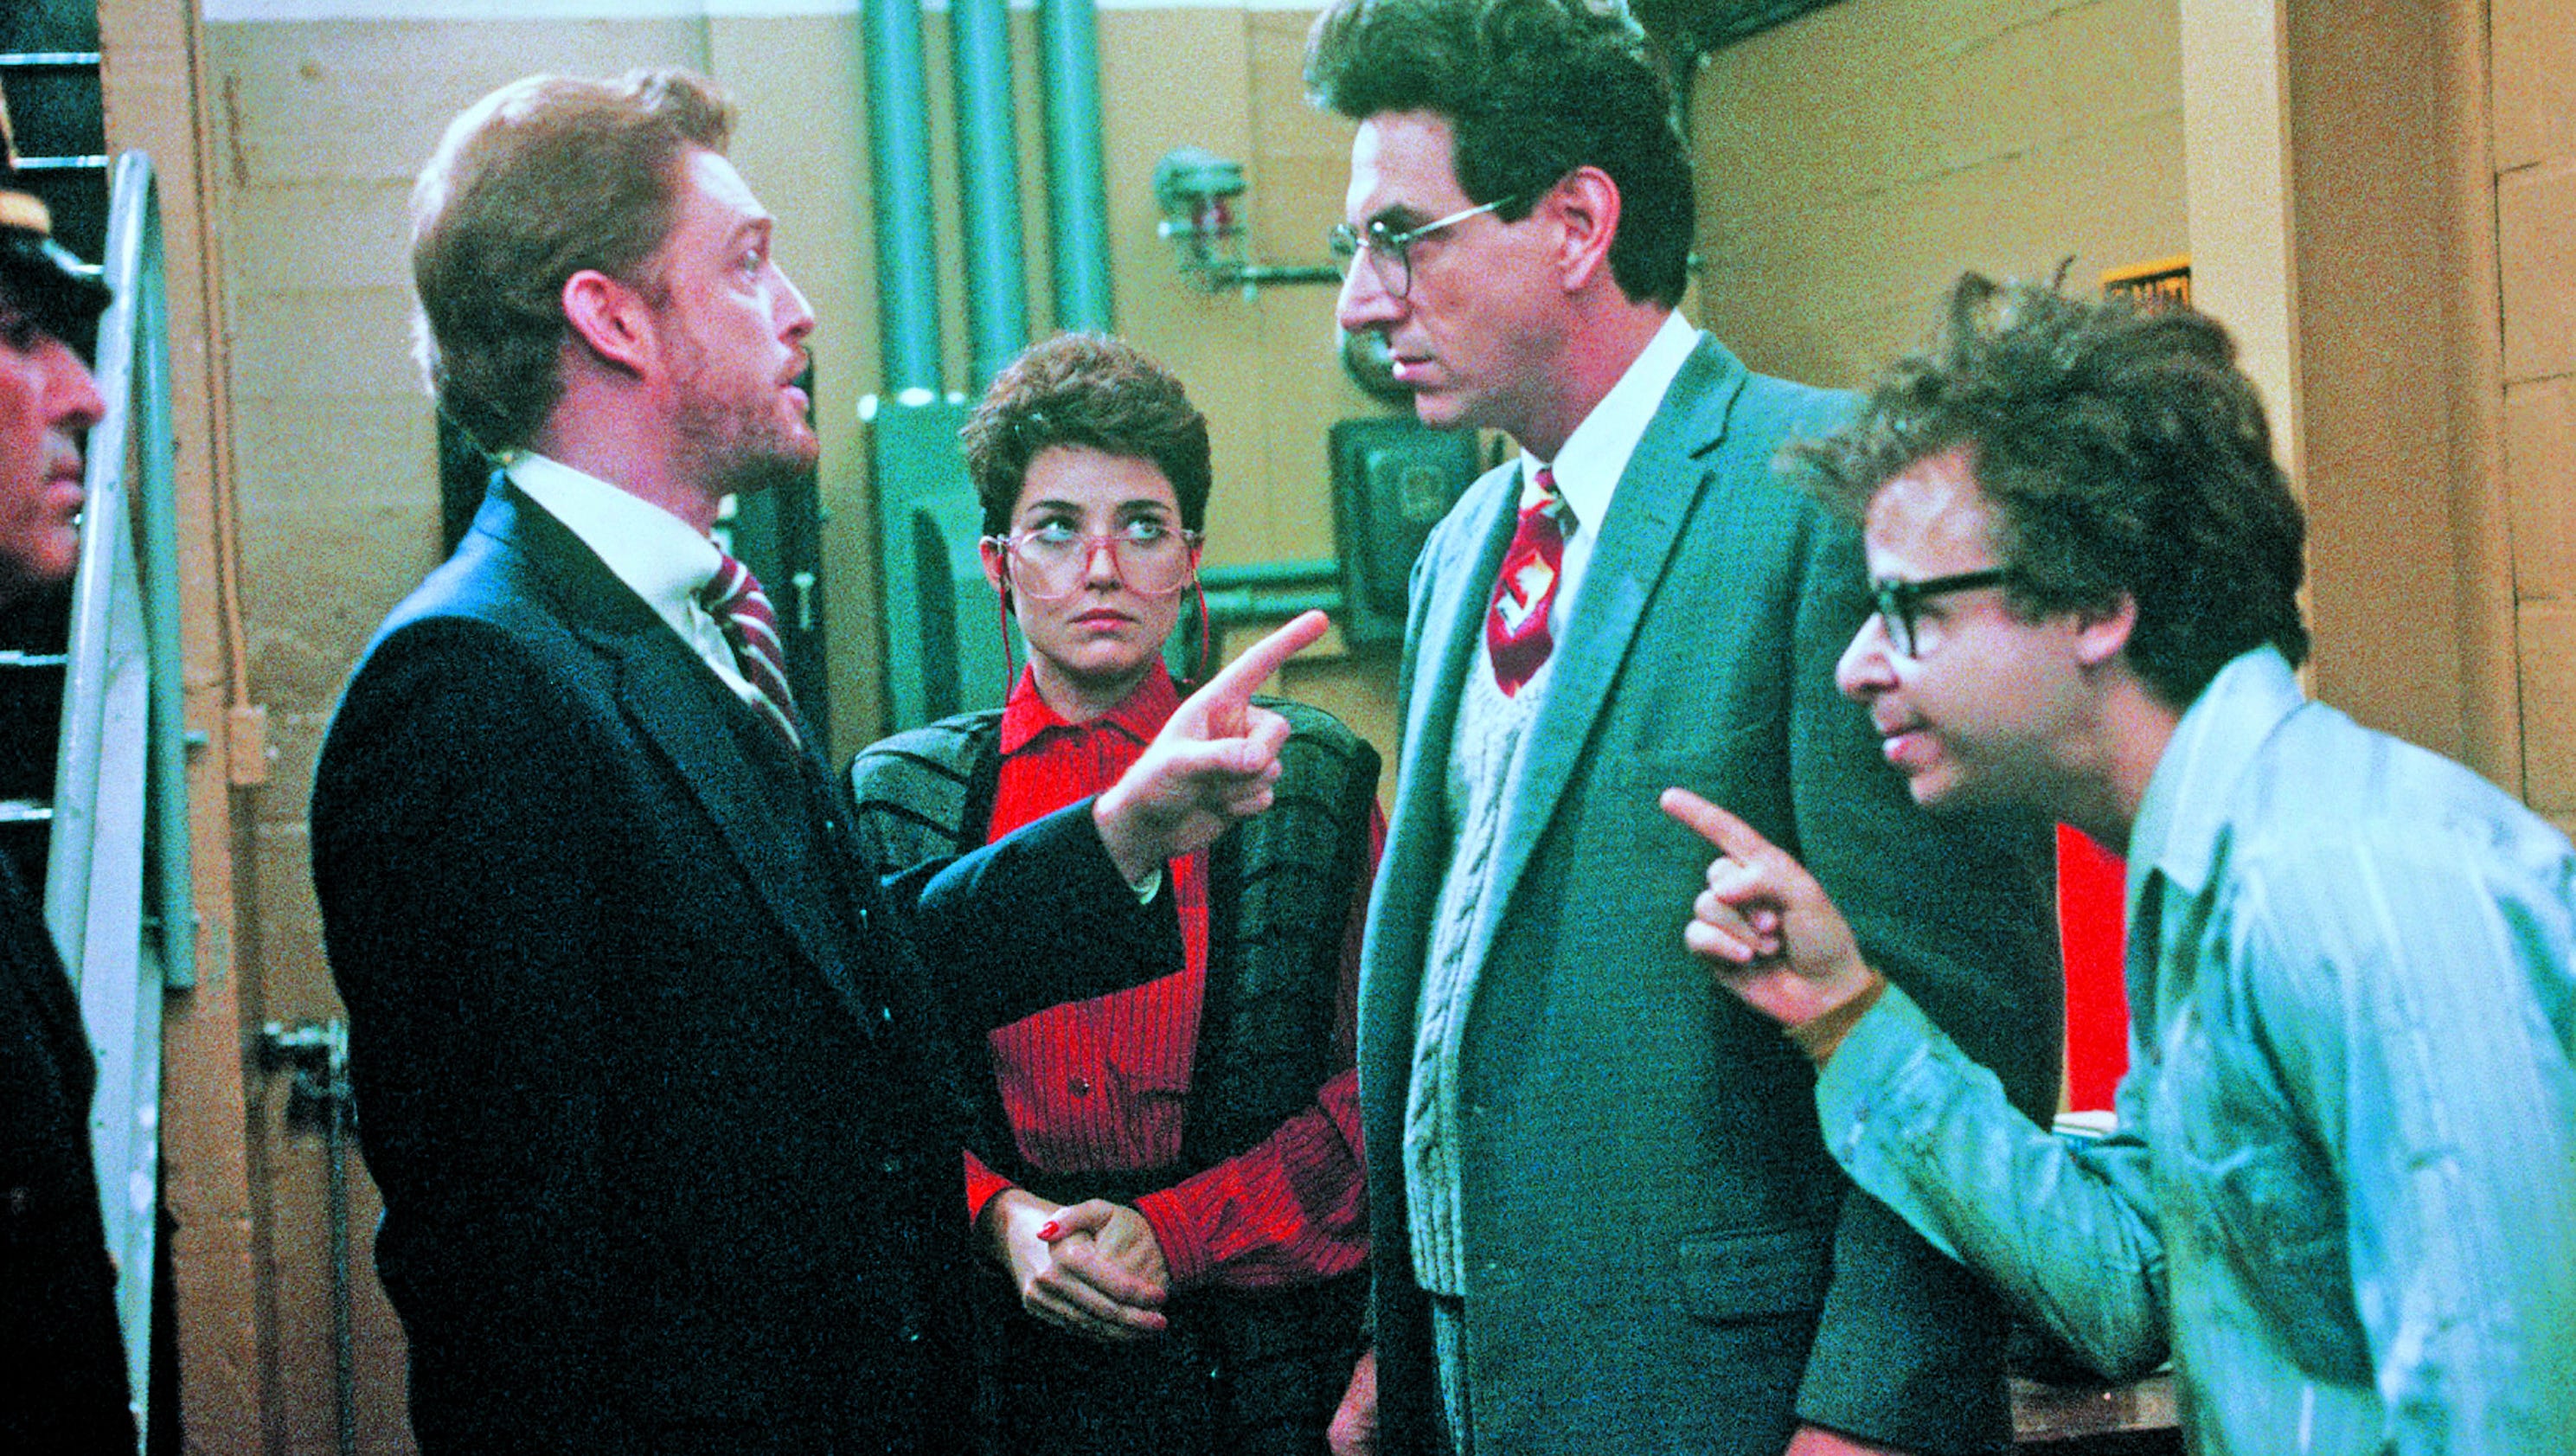 Rick Moranis turned down 'Ghostbusters' cameo, because it made 'no sense'3200 x 1680